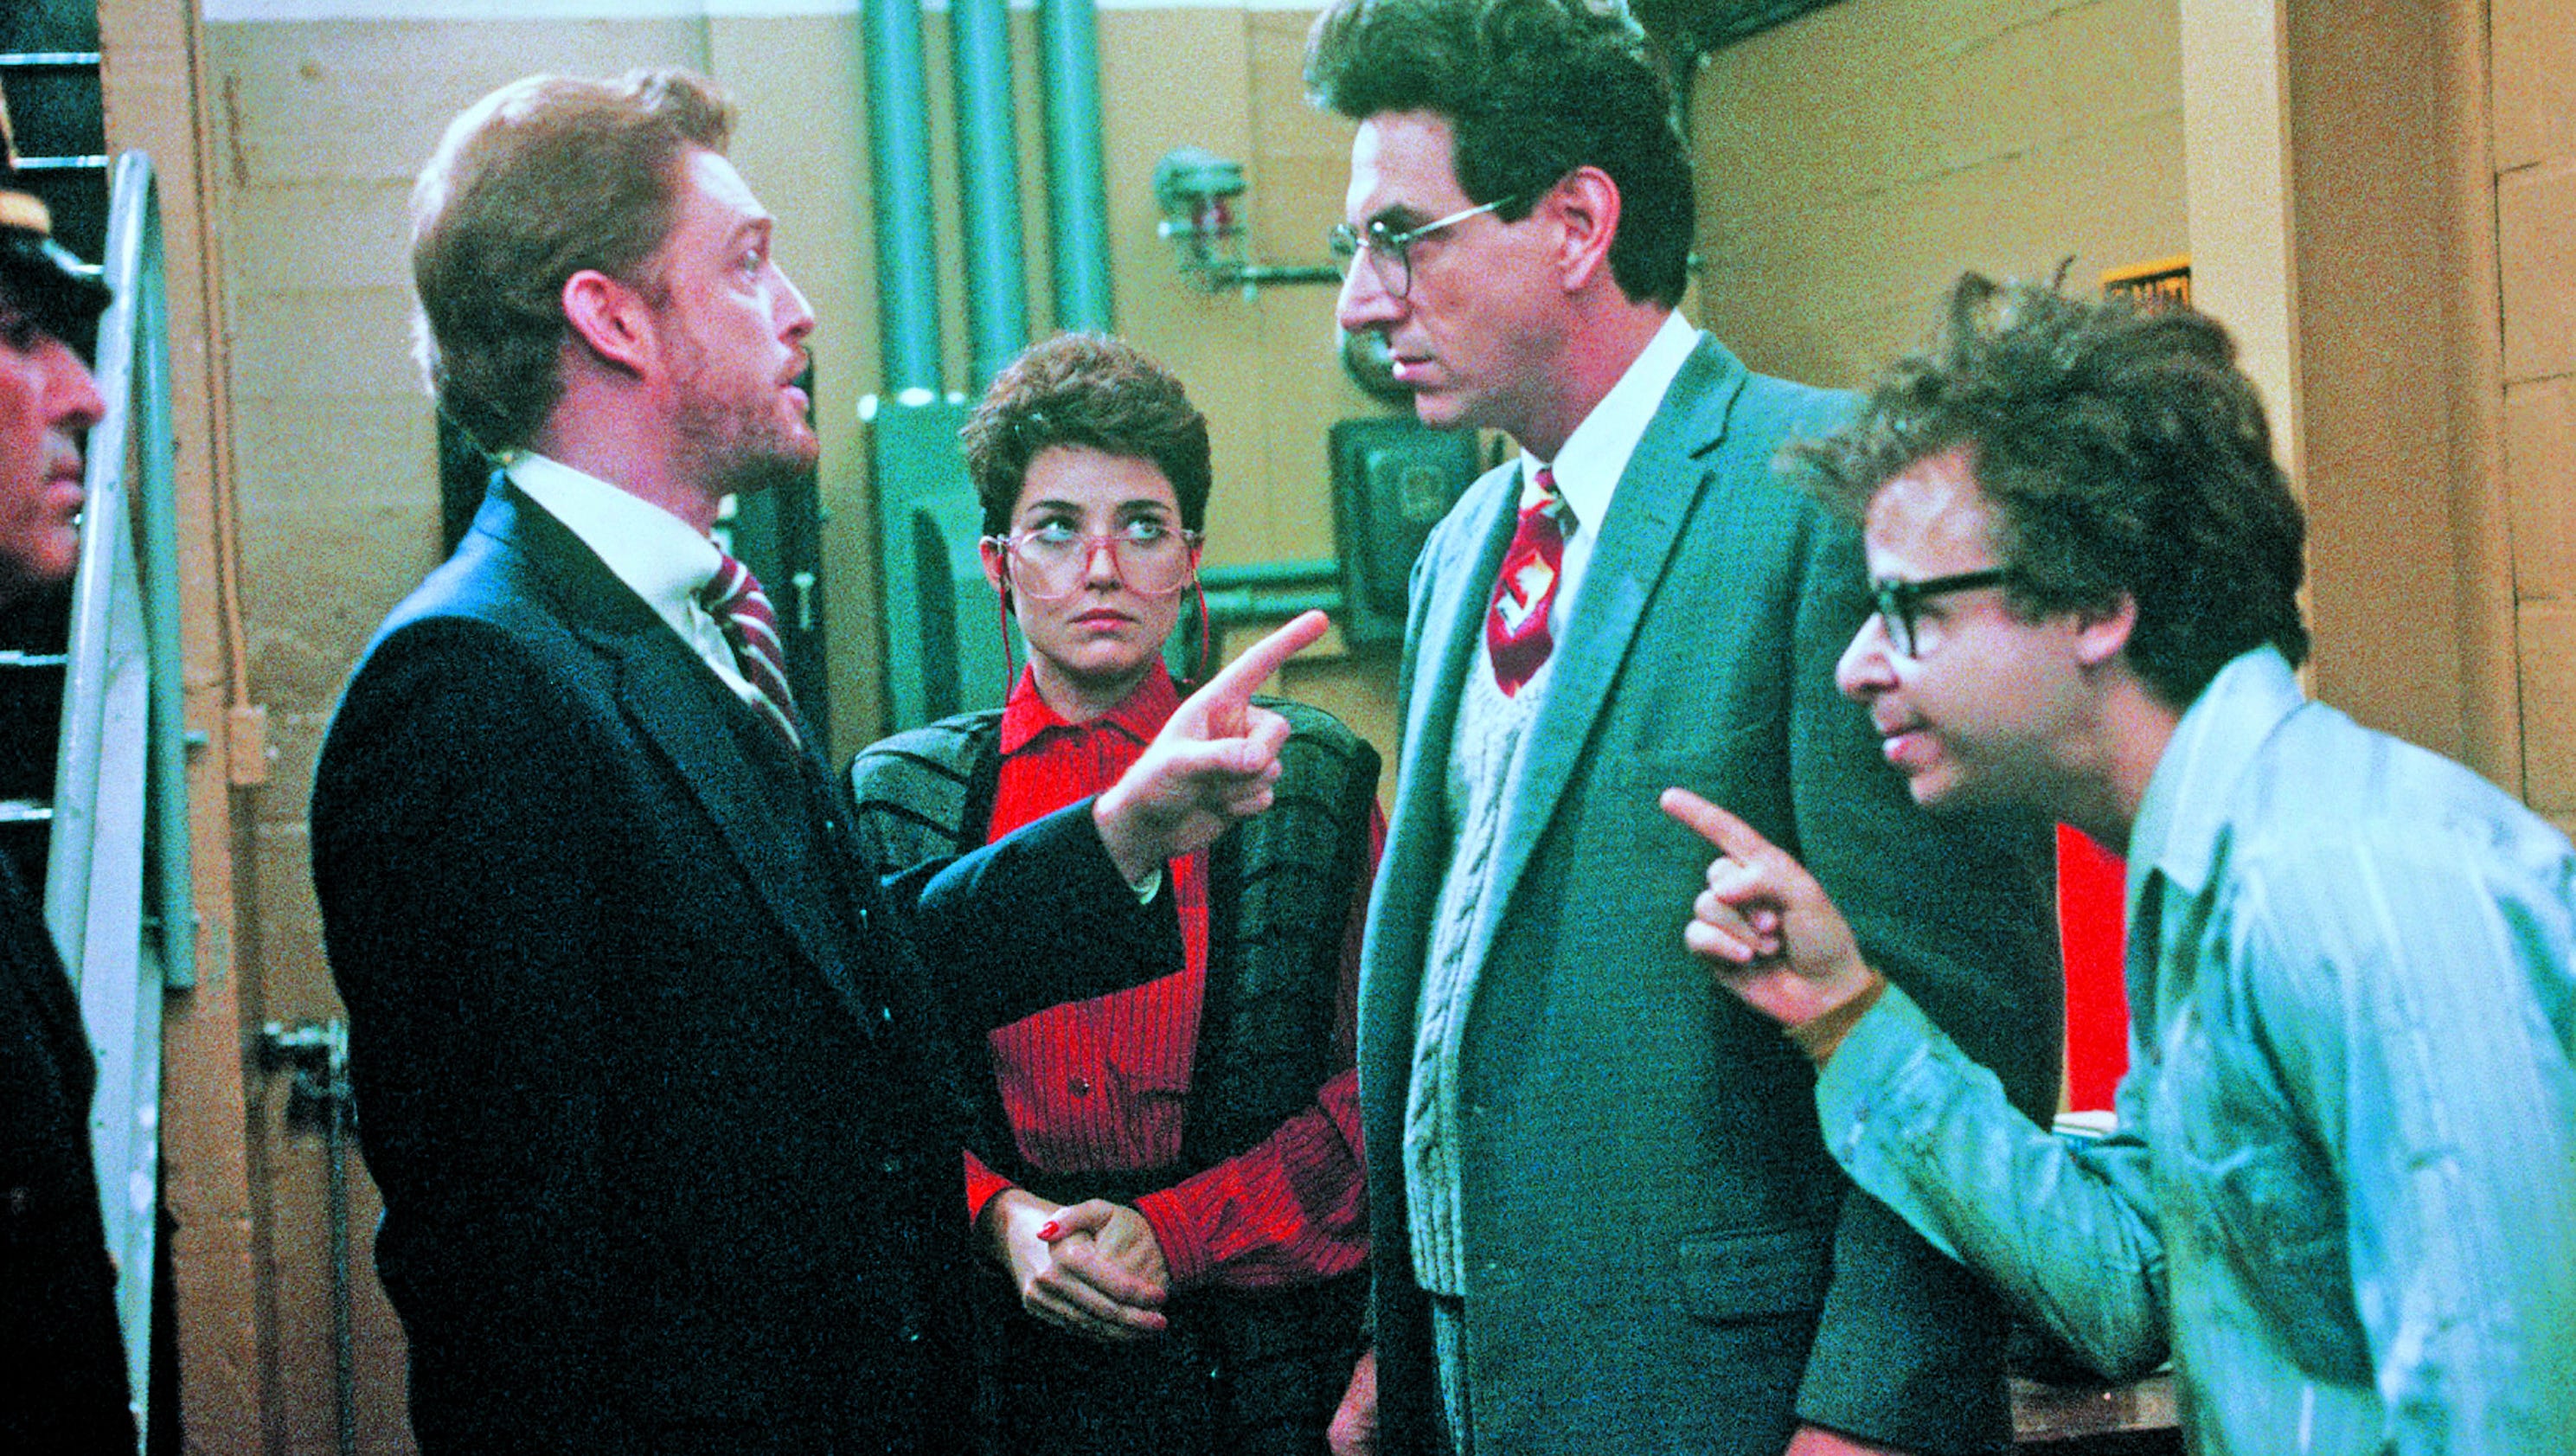 Rick Moranis turned down 'Ghostbusters' cameo, because it made 'no sense'3200 x 1680